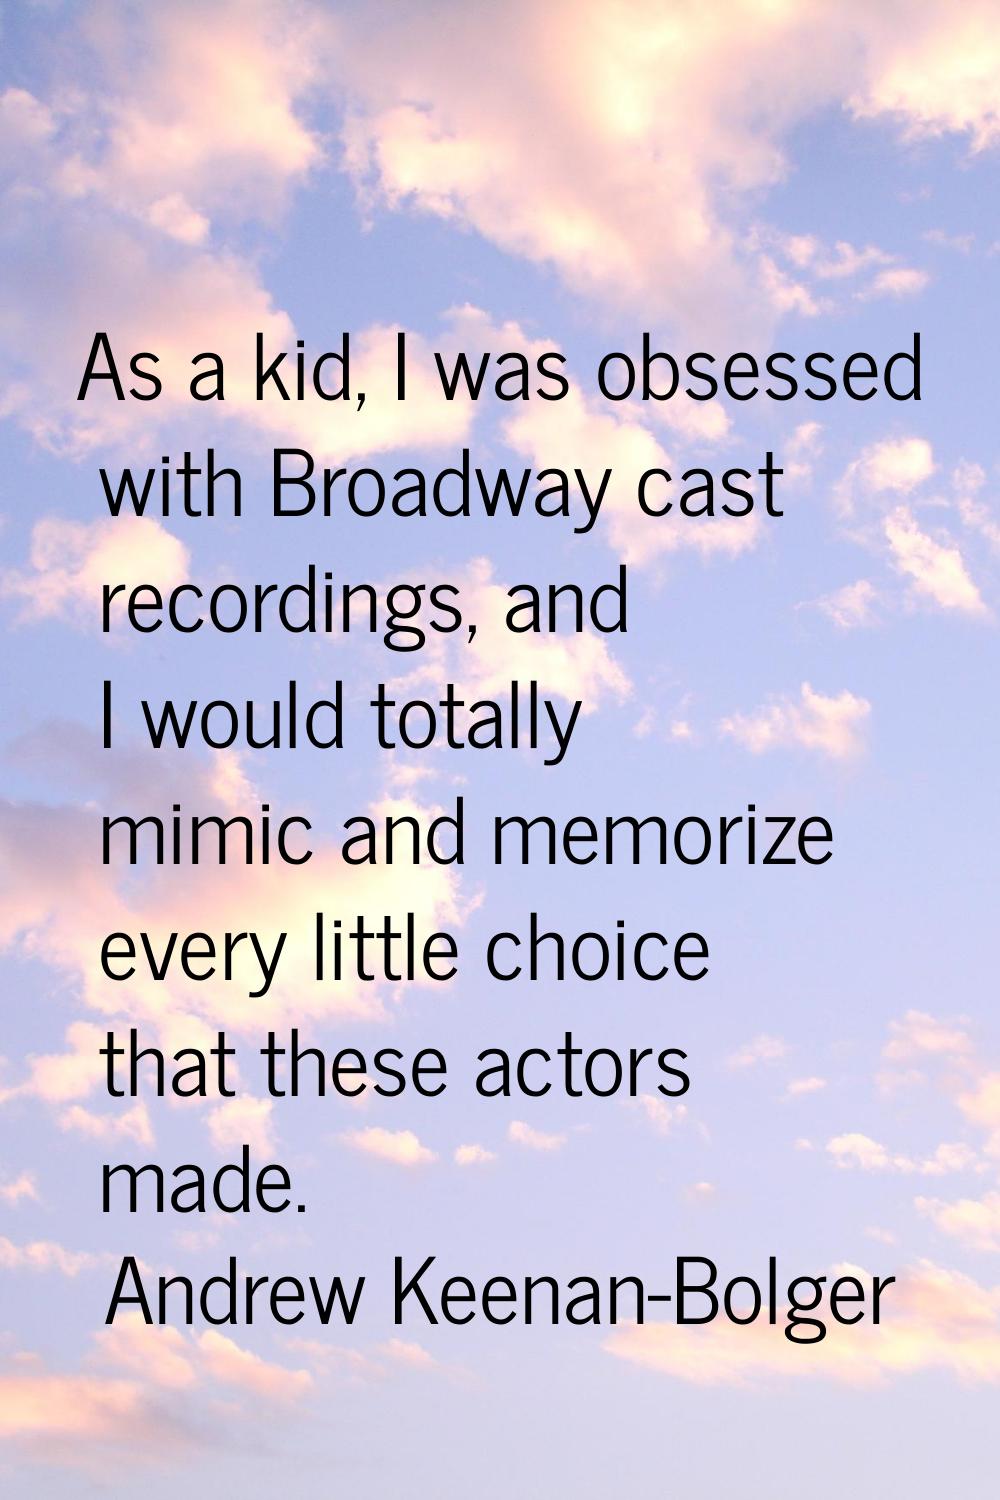 As a kid, I was obsessed with Broadway cast recordings, and I would totally mimic and memorize ever